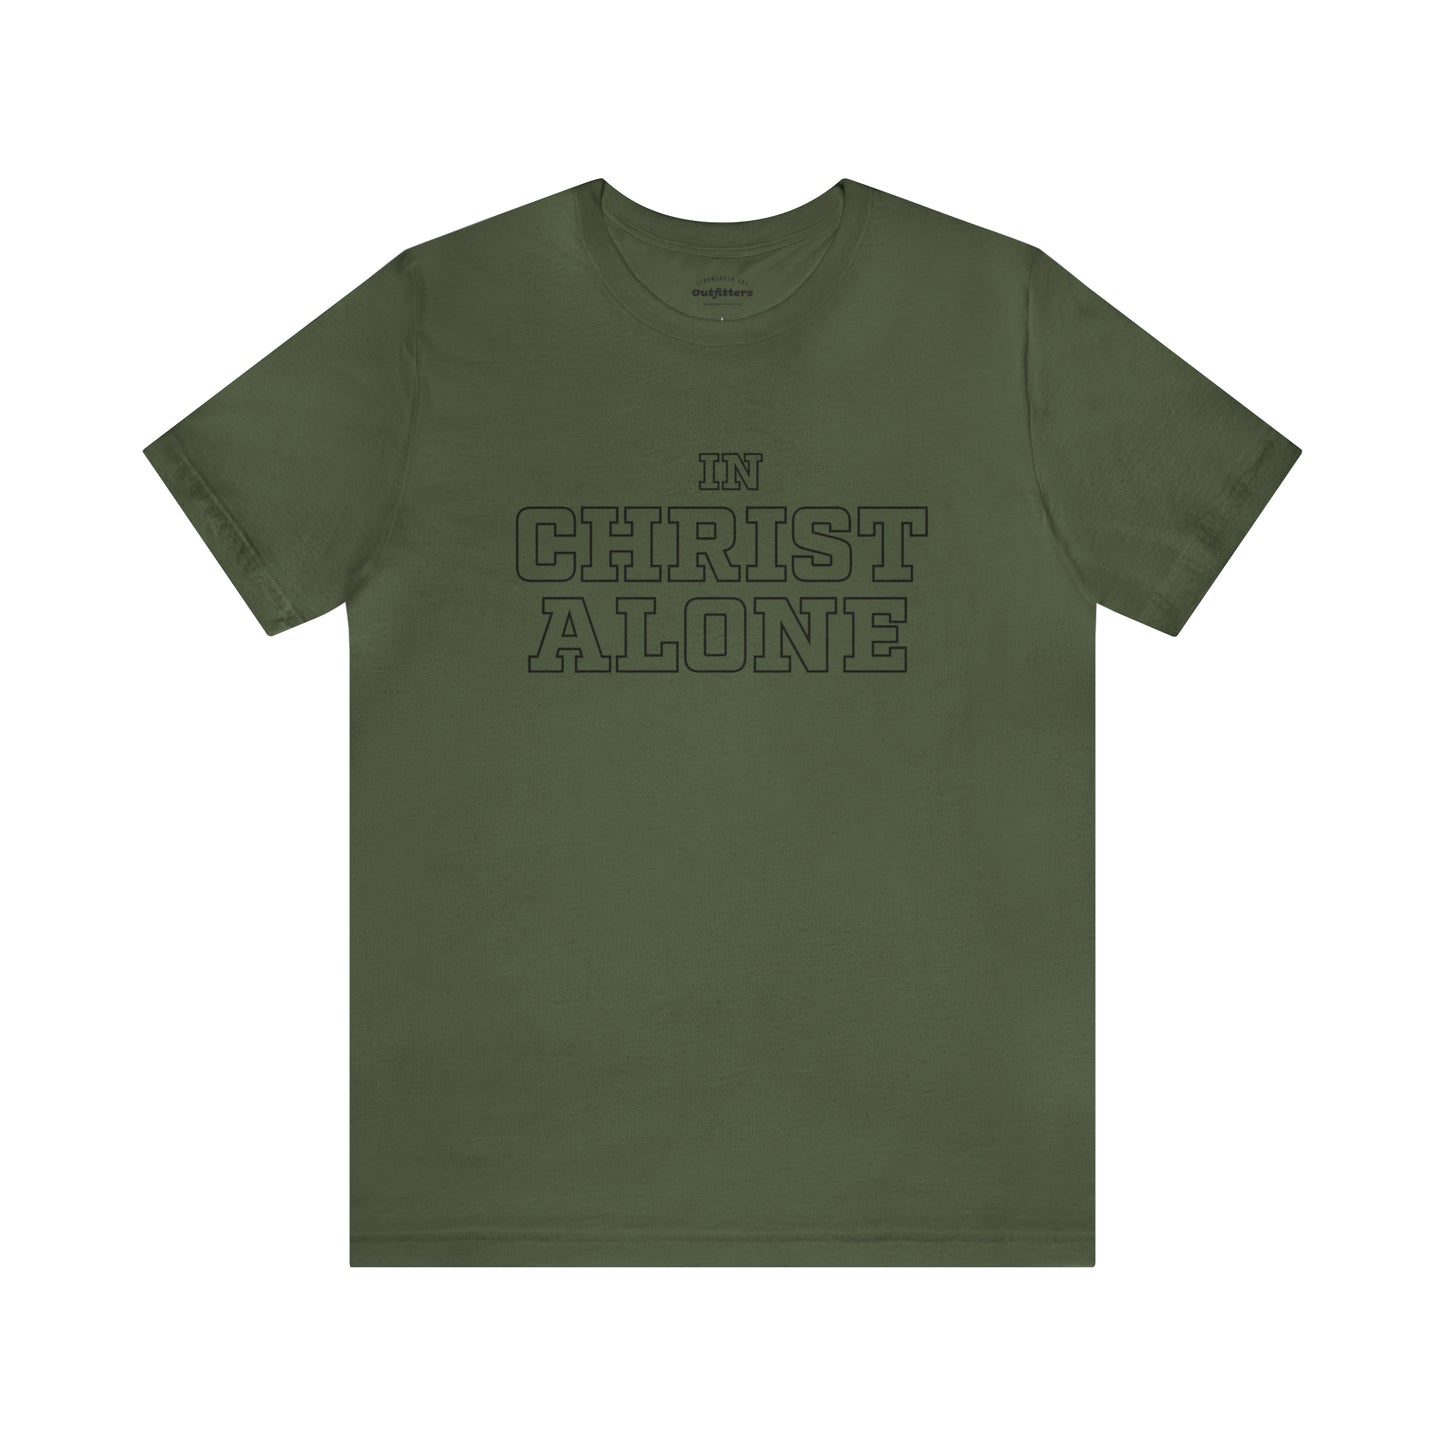 In Christ Alone T-shirt